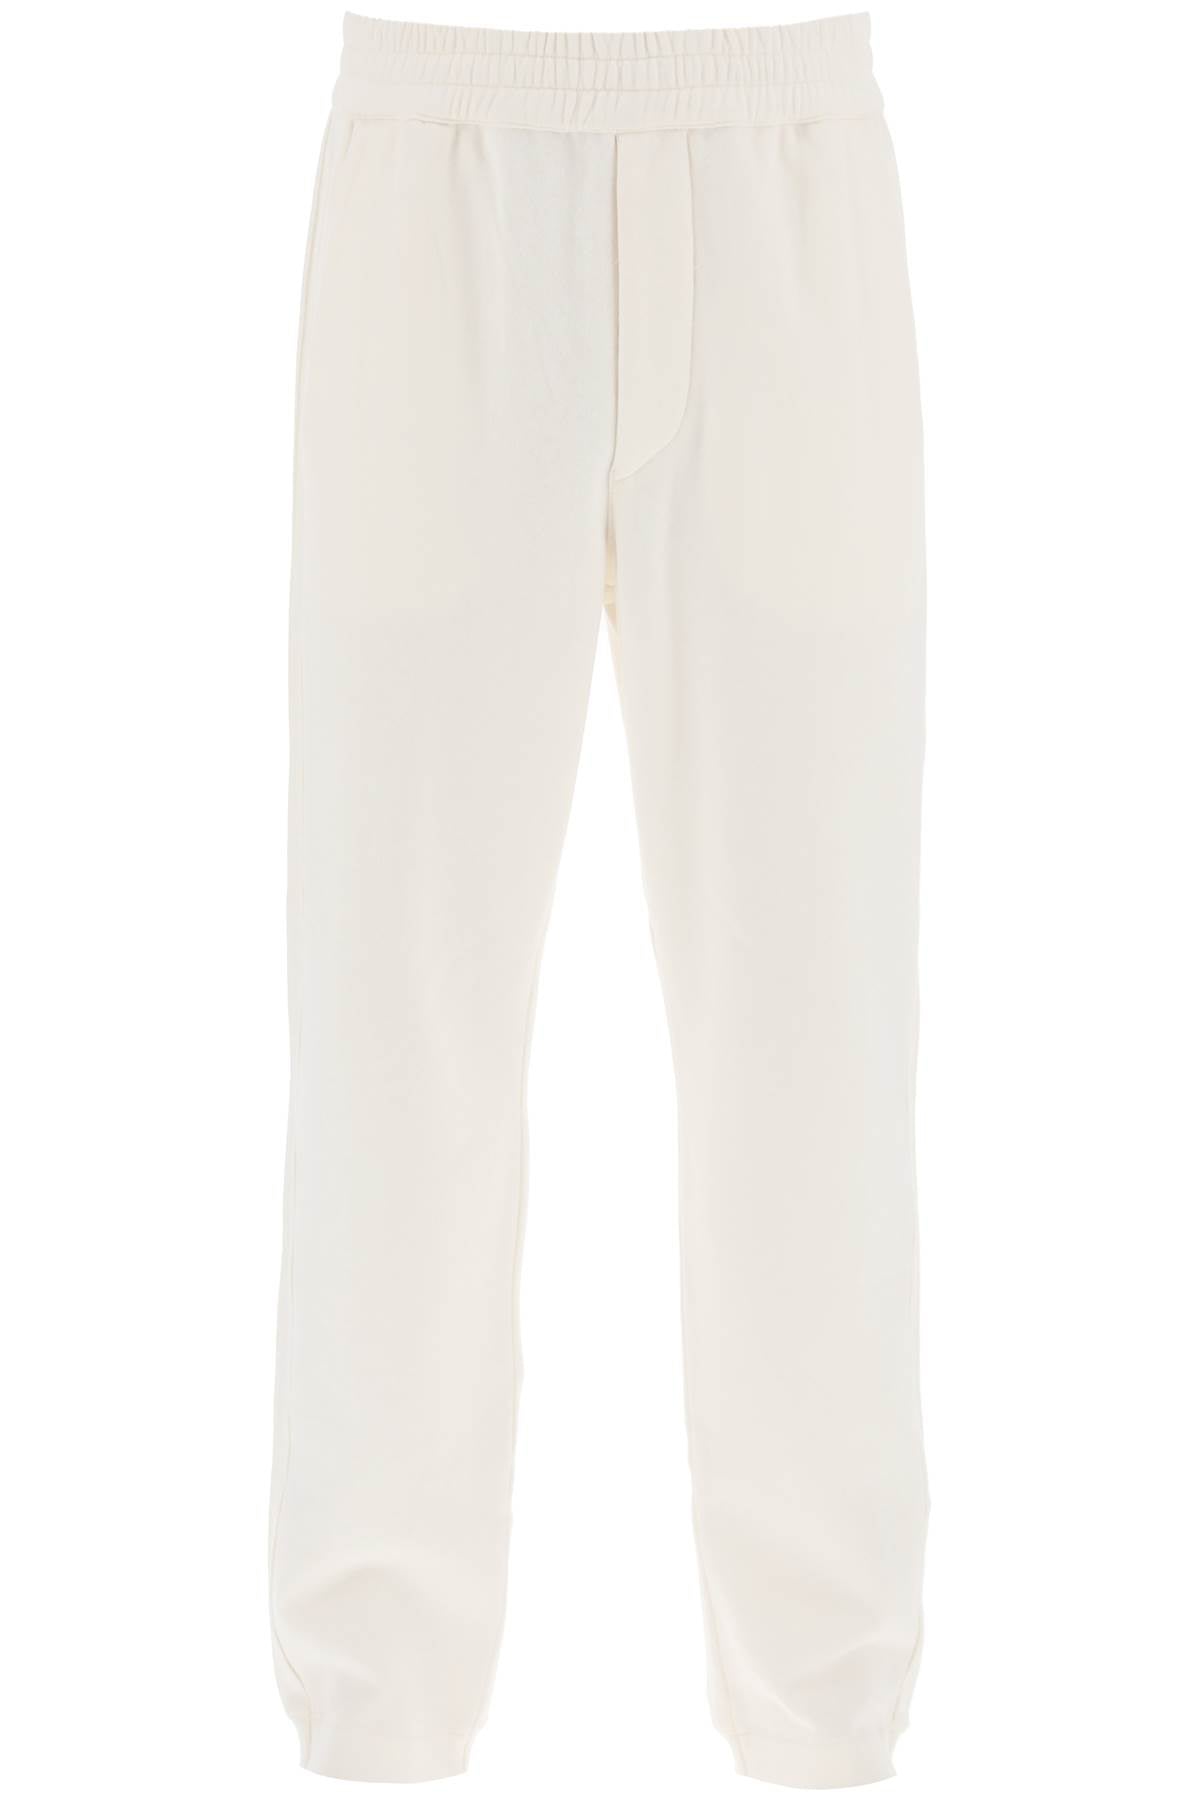 Zegna Pocket Cotton Track Pants In White